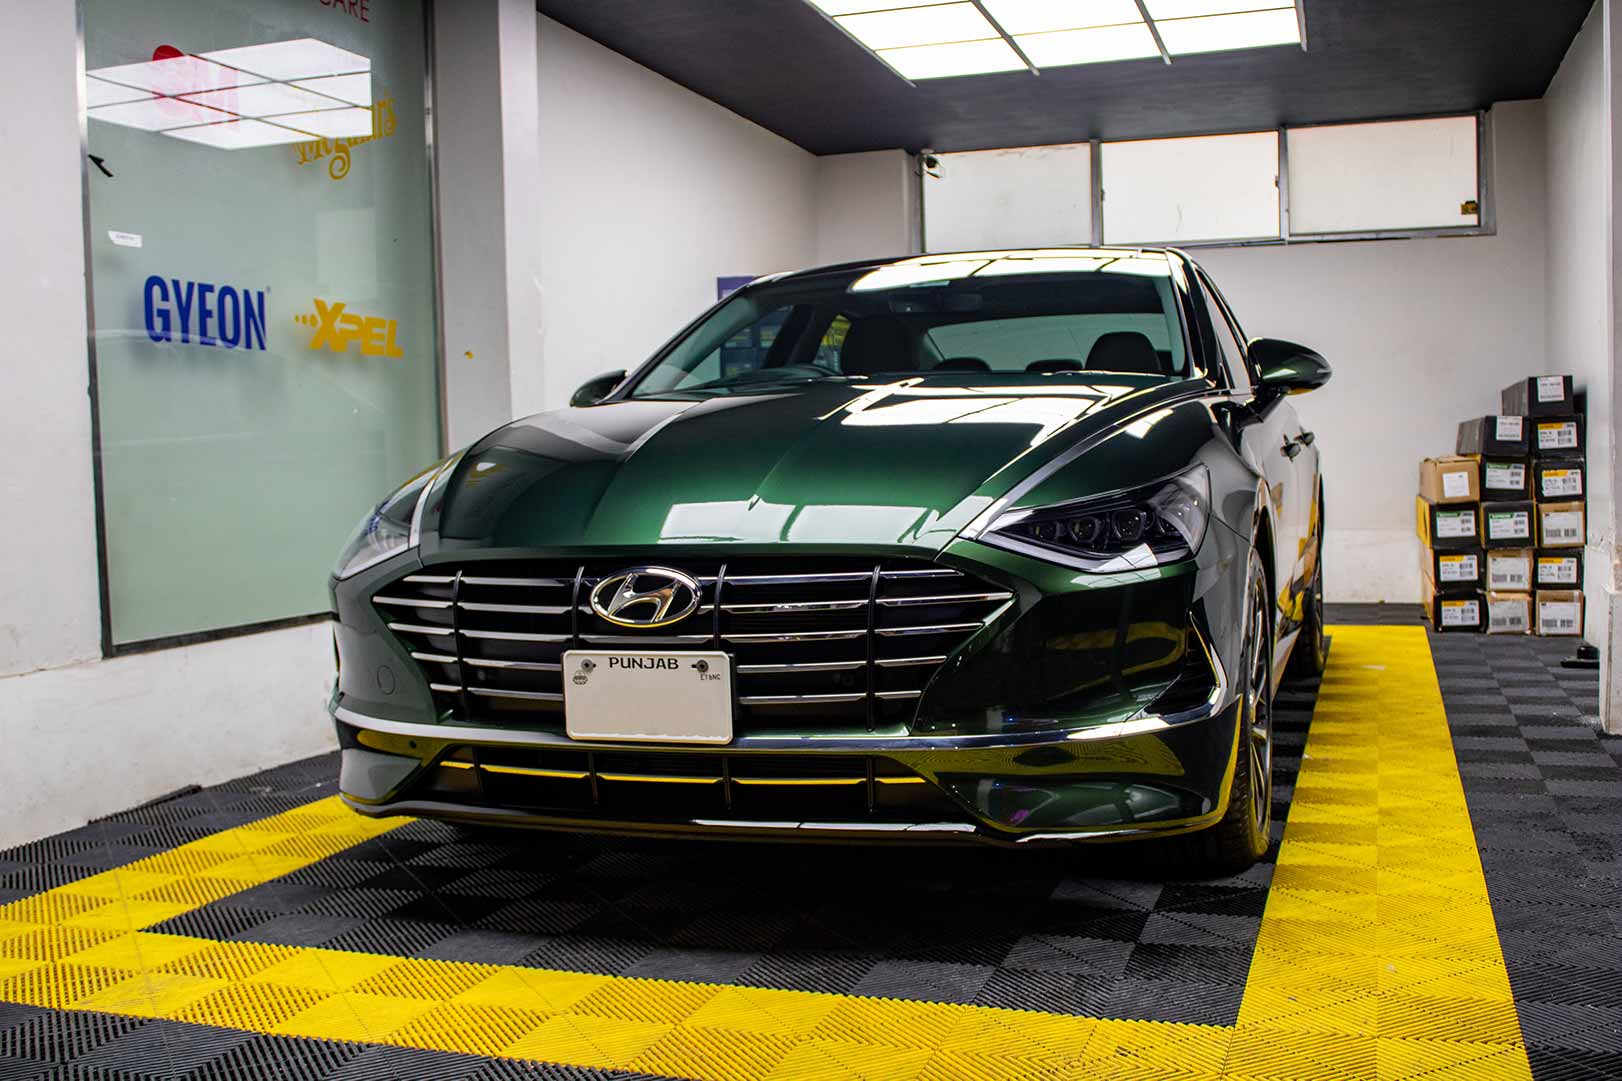 Image of sonata after wrap applied. Wrap is Inozetek Supergloss metallic midnight green. Installed by protek car care, Lahore, Pakistan